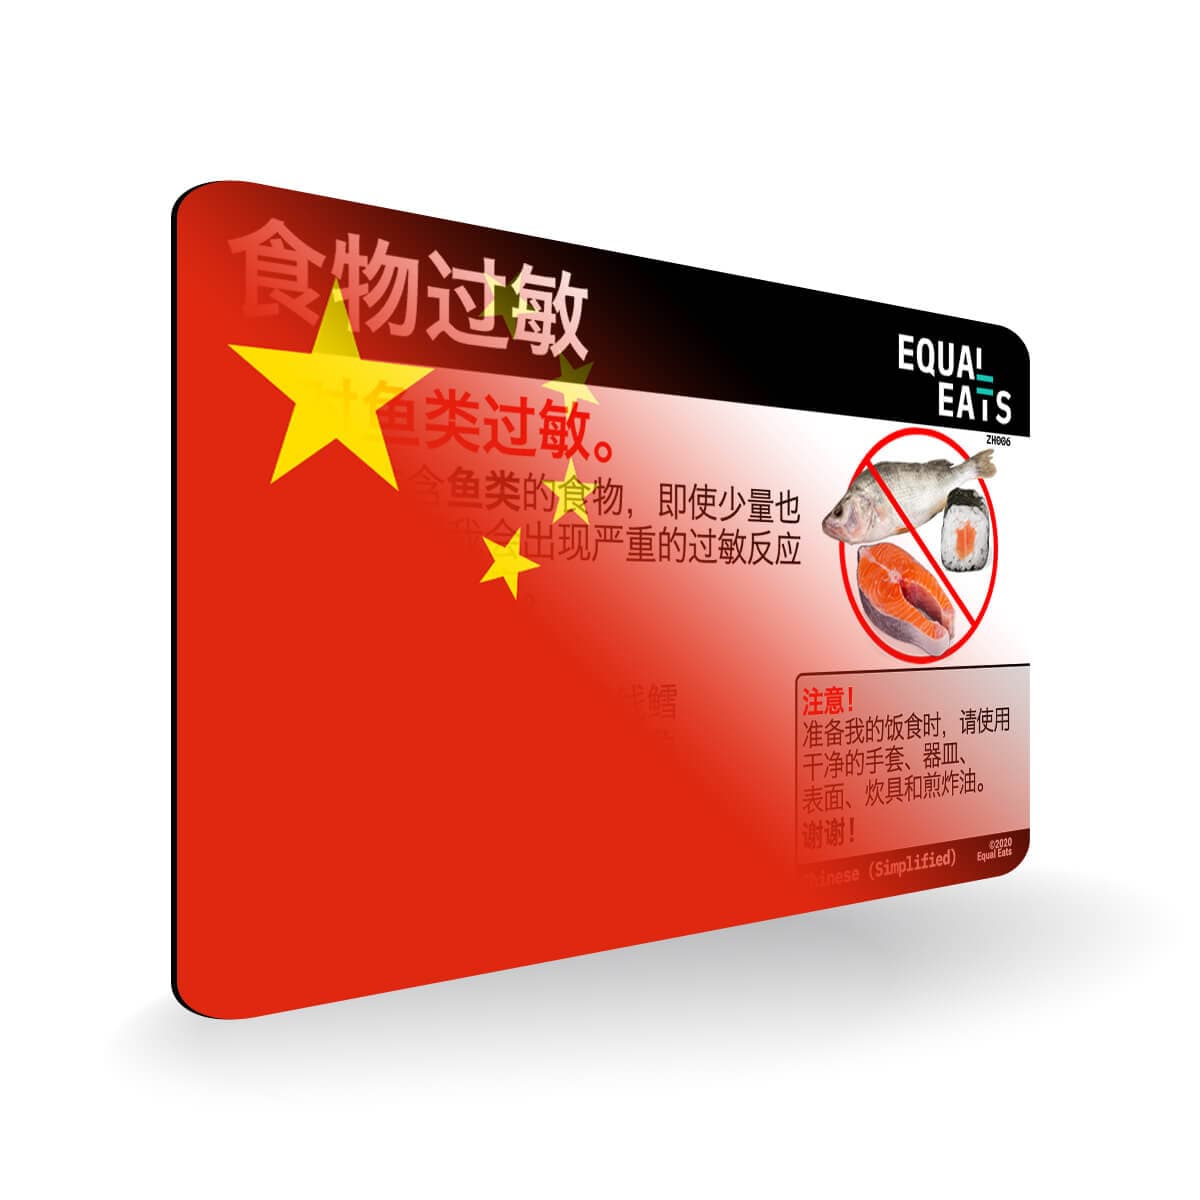 Fish Allergy in Simplified Chinese. Fish Allergy Card for China